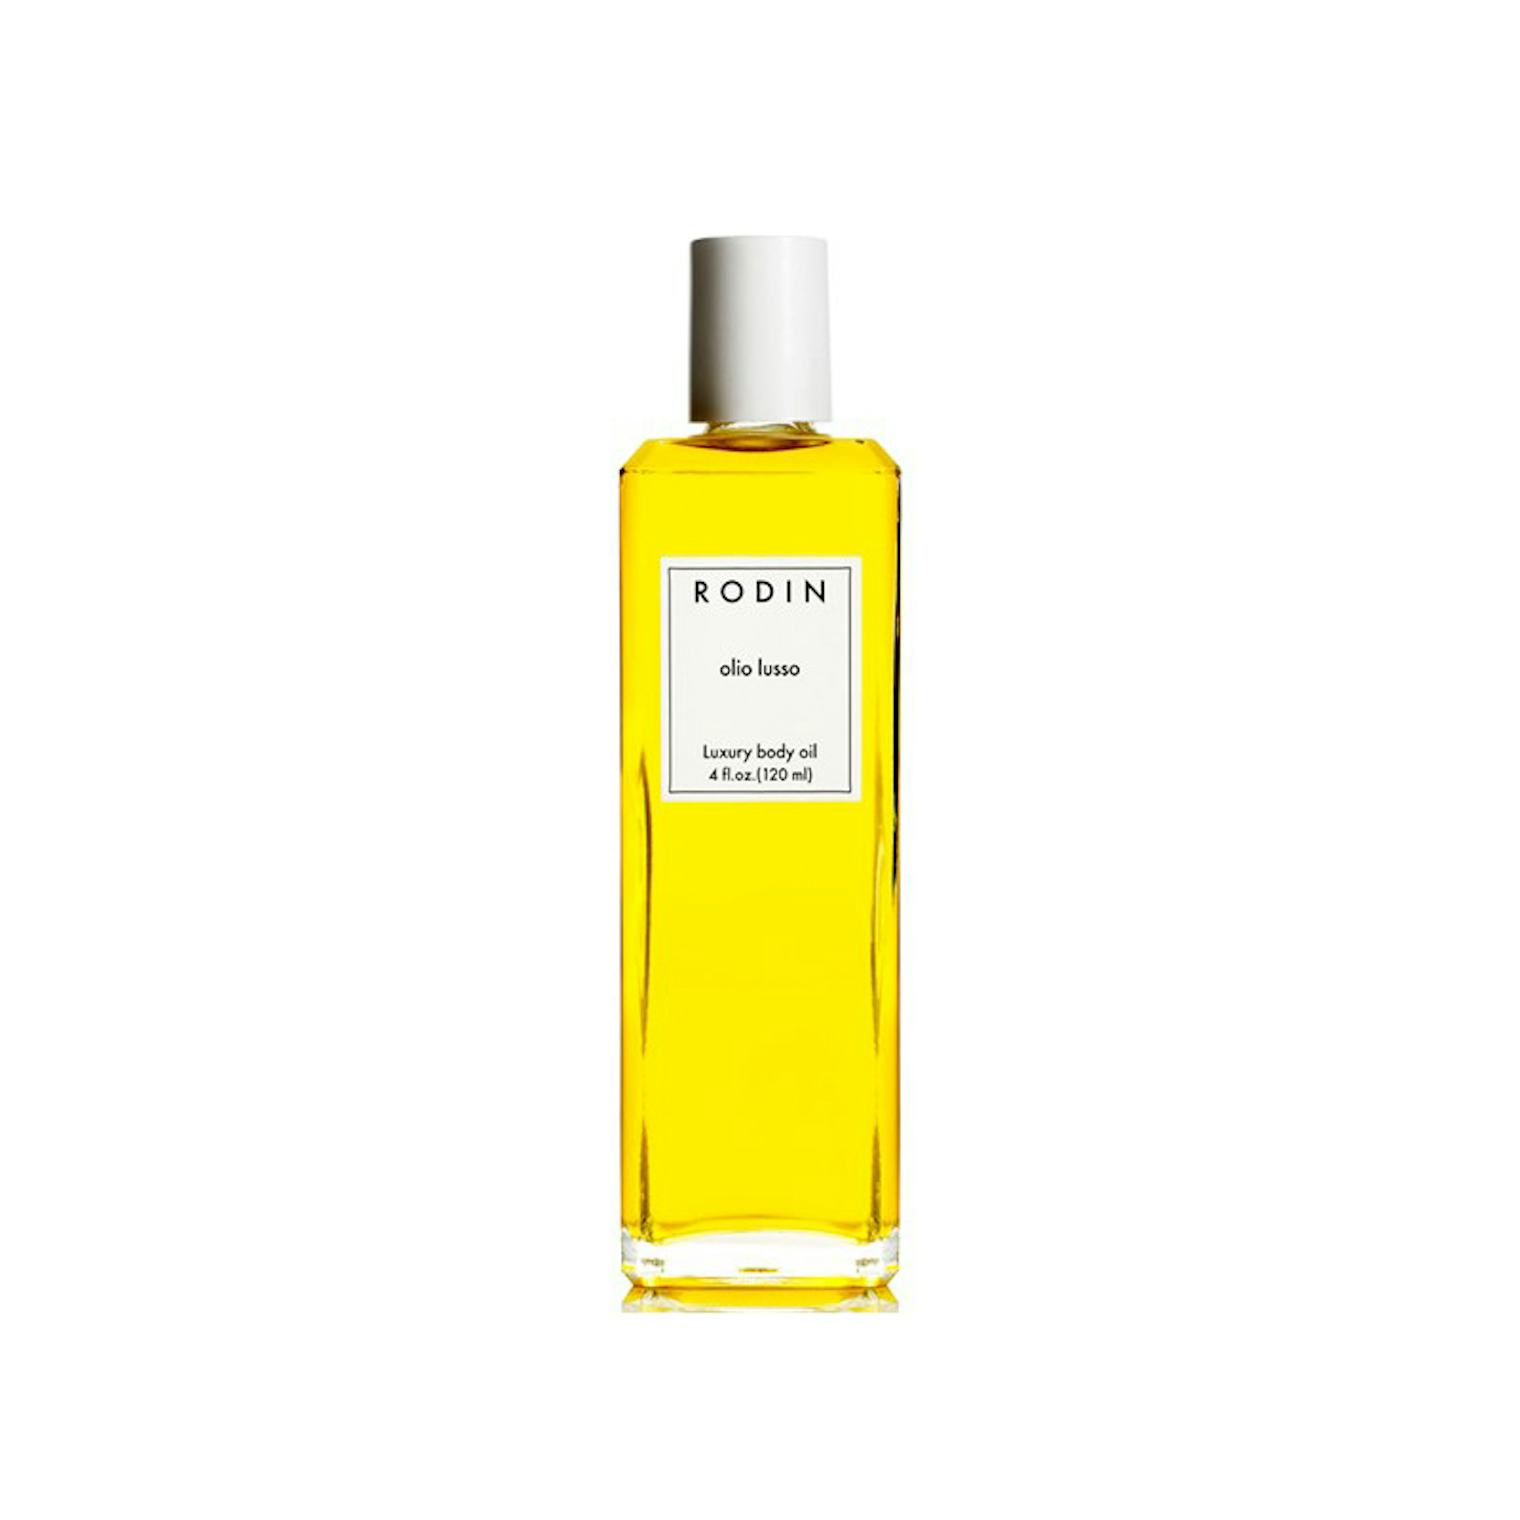 Linda Rodin Has Launched A Lavender Version of Her Iconic Rodin Olio Lusso